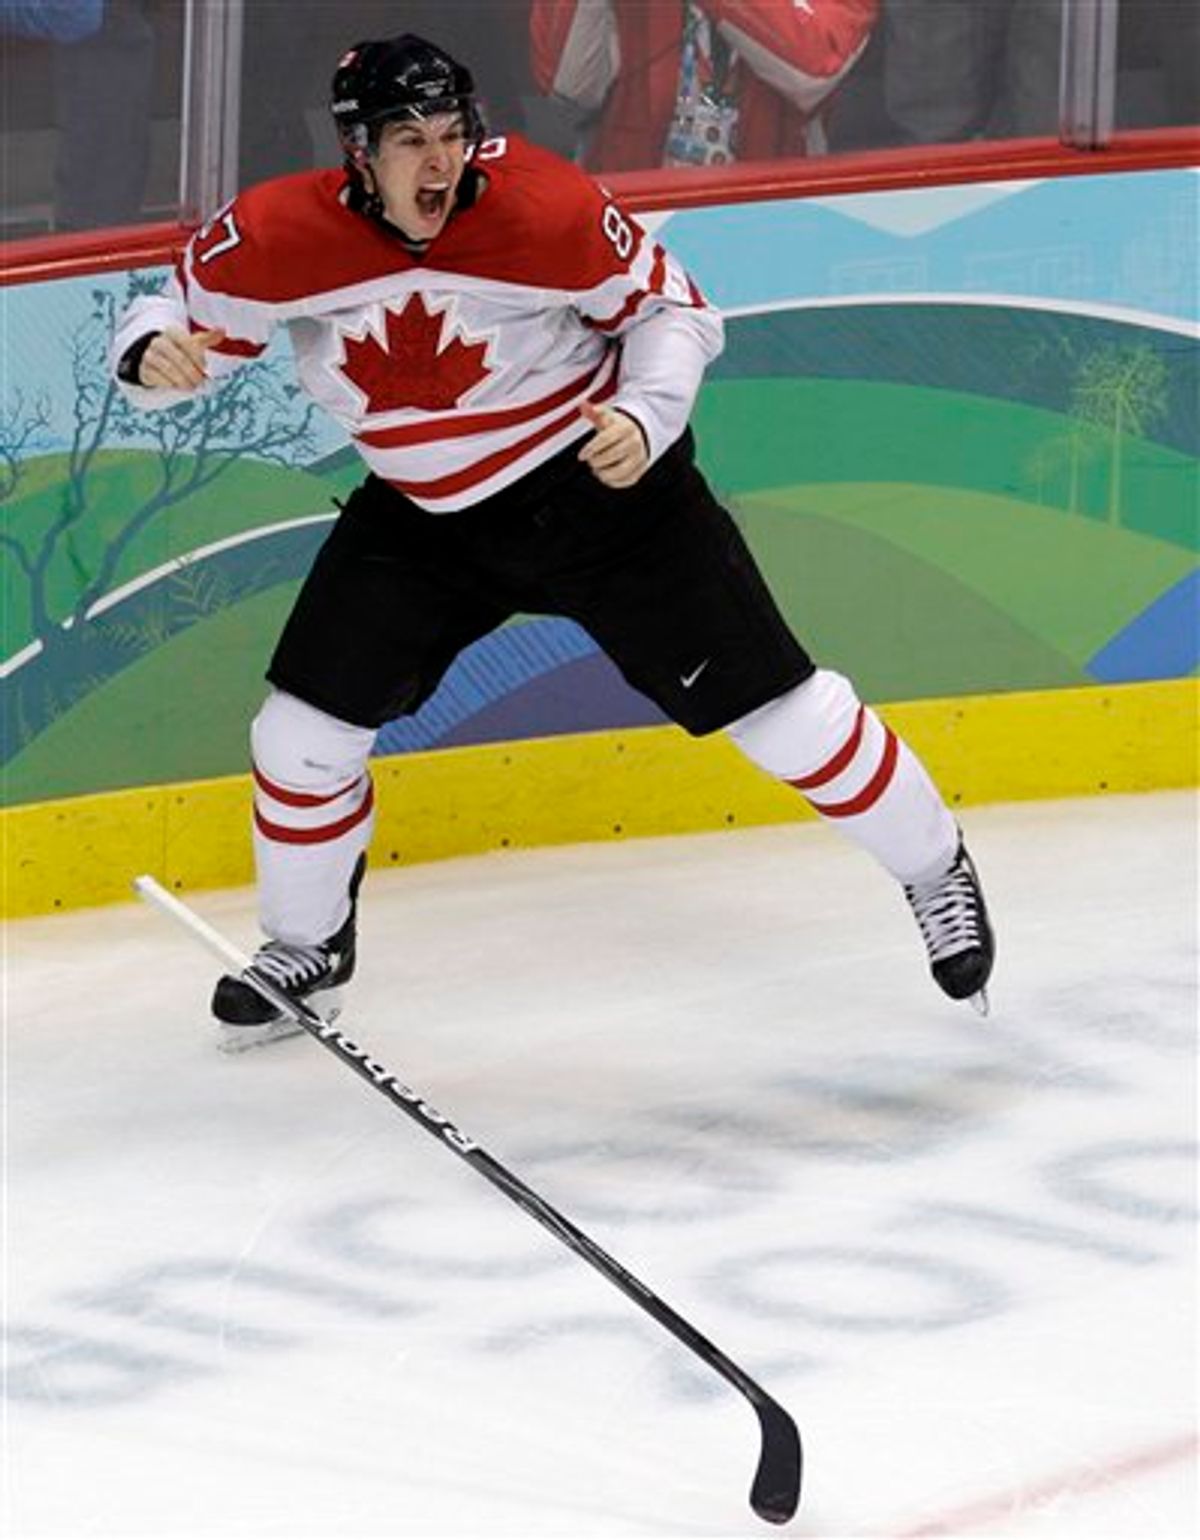 Canada's Sidney Crosby (87) reacts after scoring the game-winning goal in the overtime period of a men's gold medal ice hockey game against USA at the Vancouver 2010 Olympics in Vancouver, British Columbia, Sunday, Feb. 28, 2010. (AP Photo/Chris O'Meara) (AP)